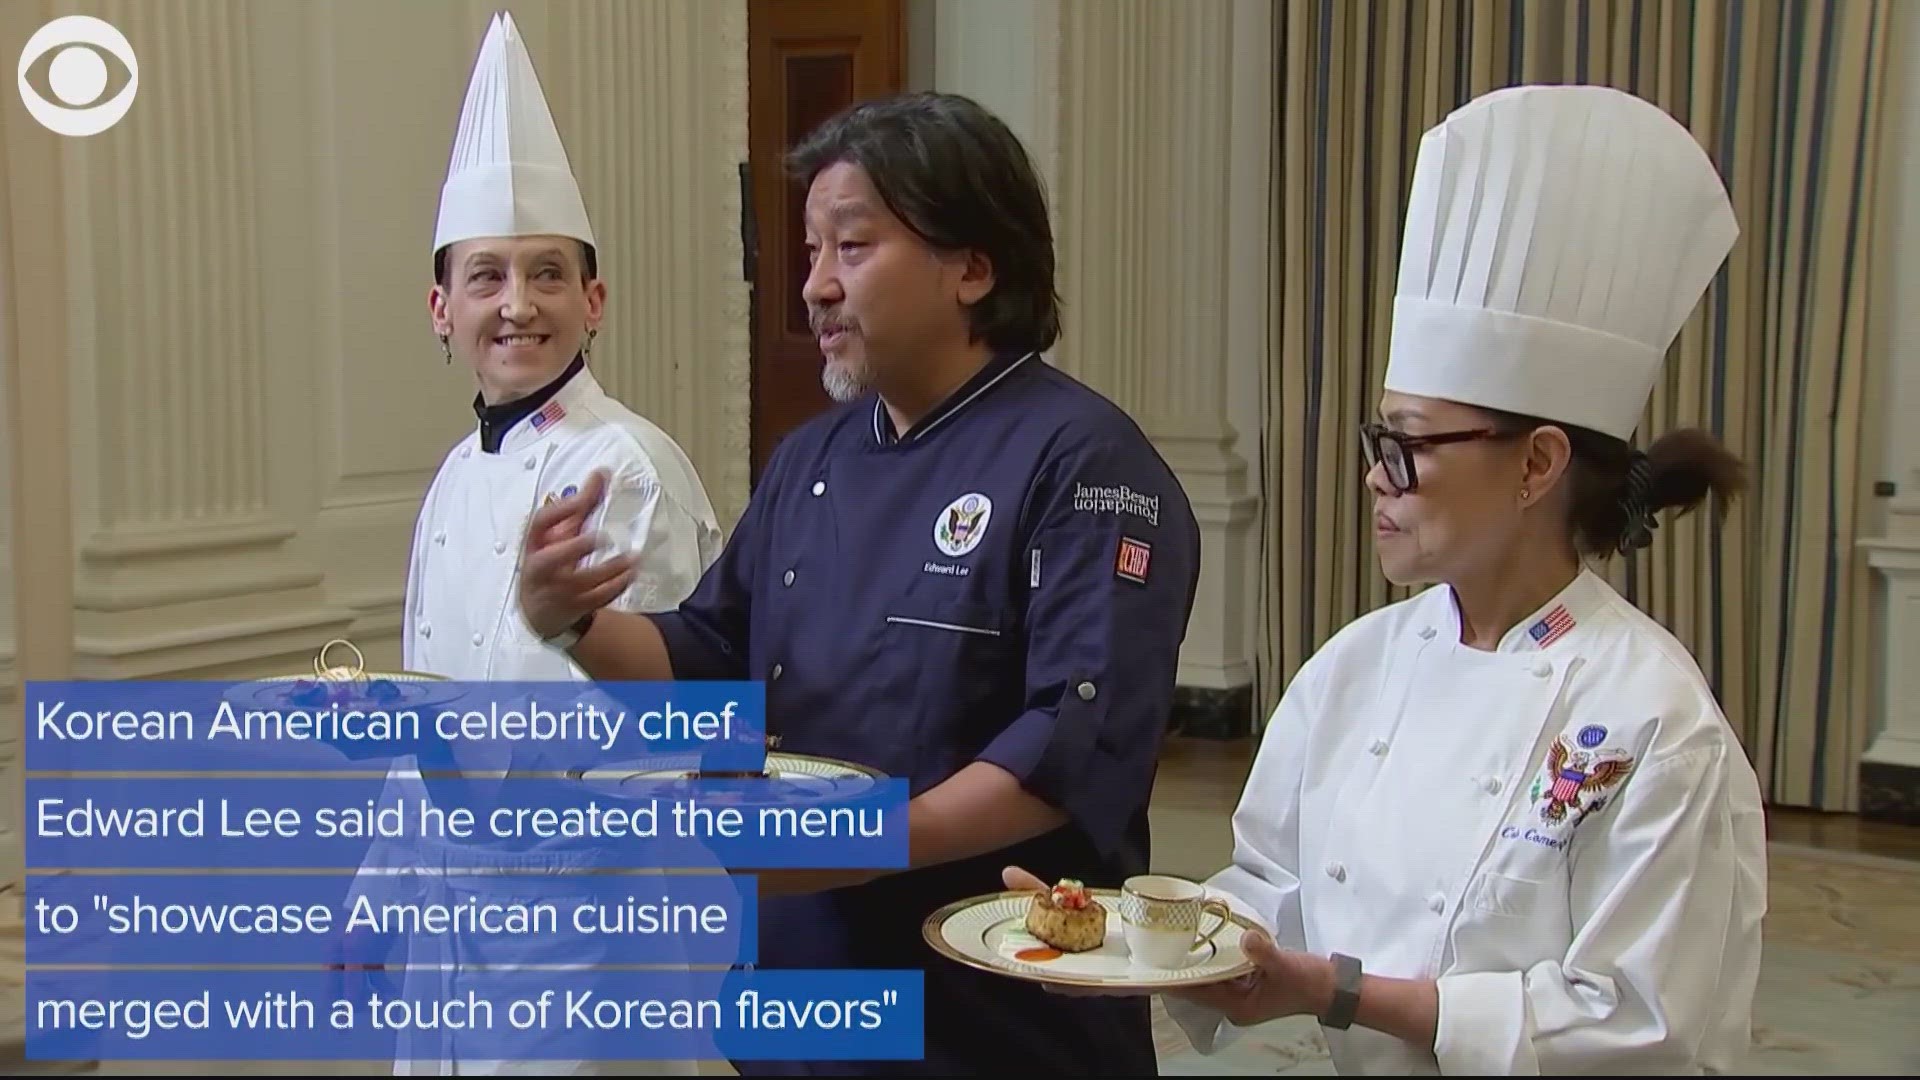 Chef Edward Lee will prepare the State Dinner for President Joe Biden, First Lady Dr. Jill Biden, and the President of South Korea.